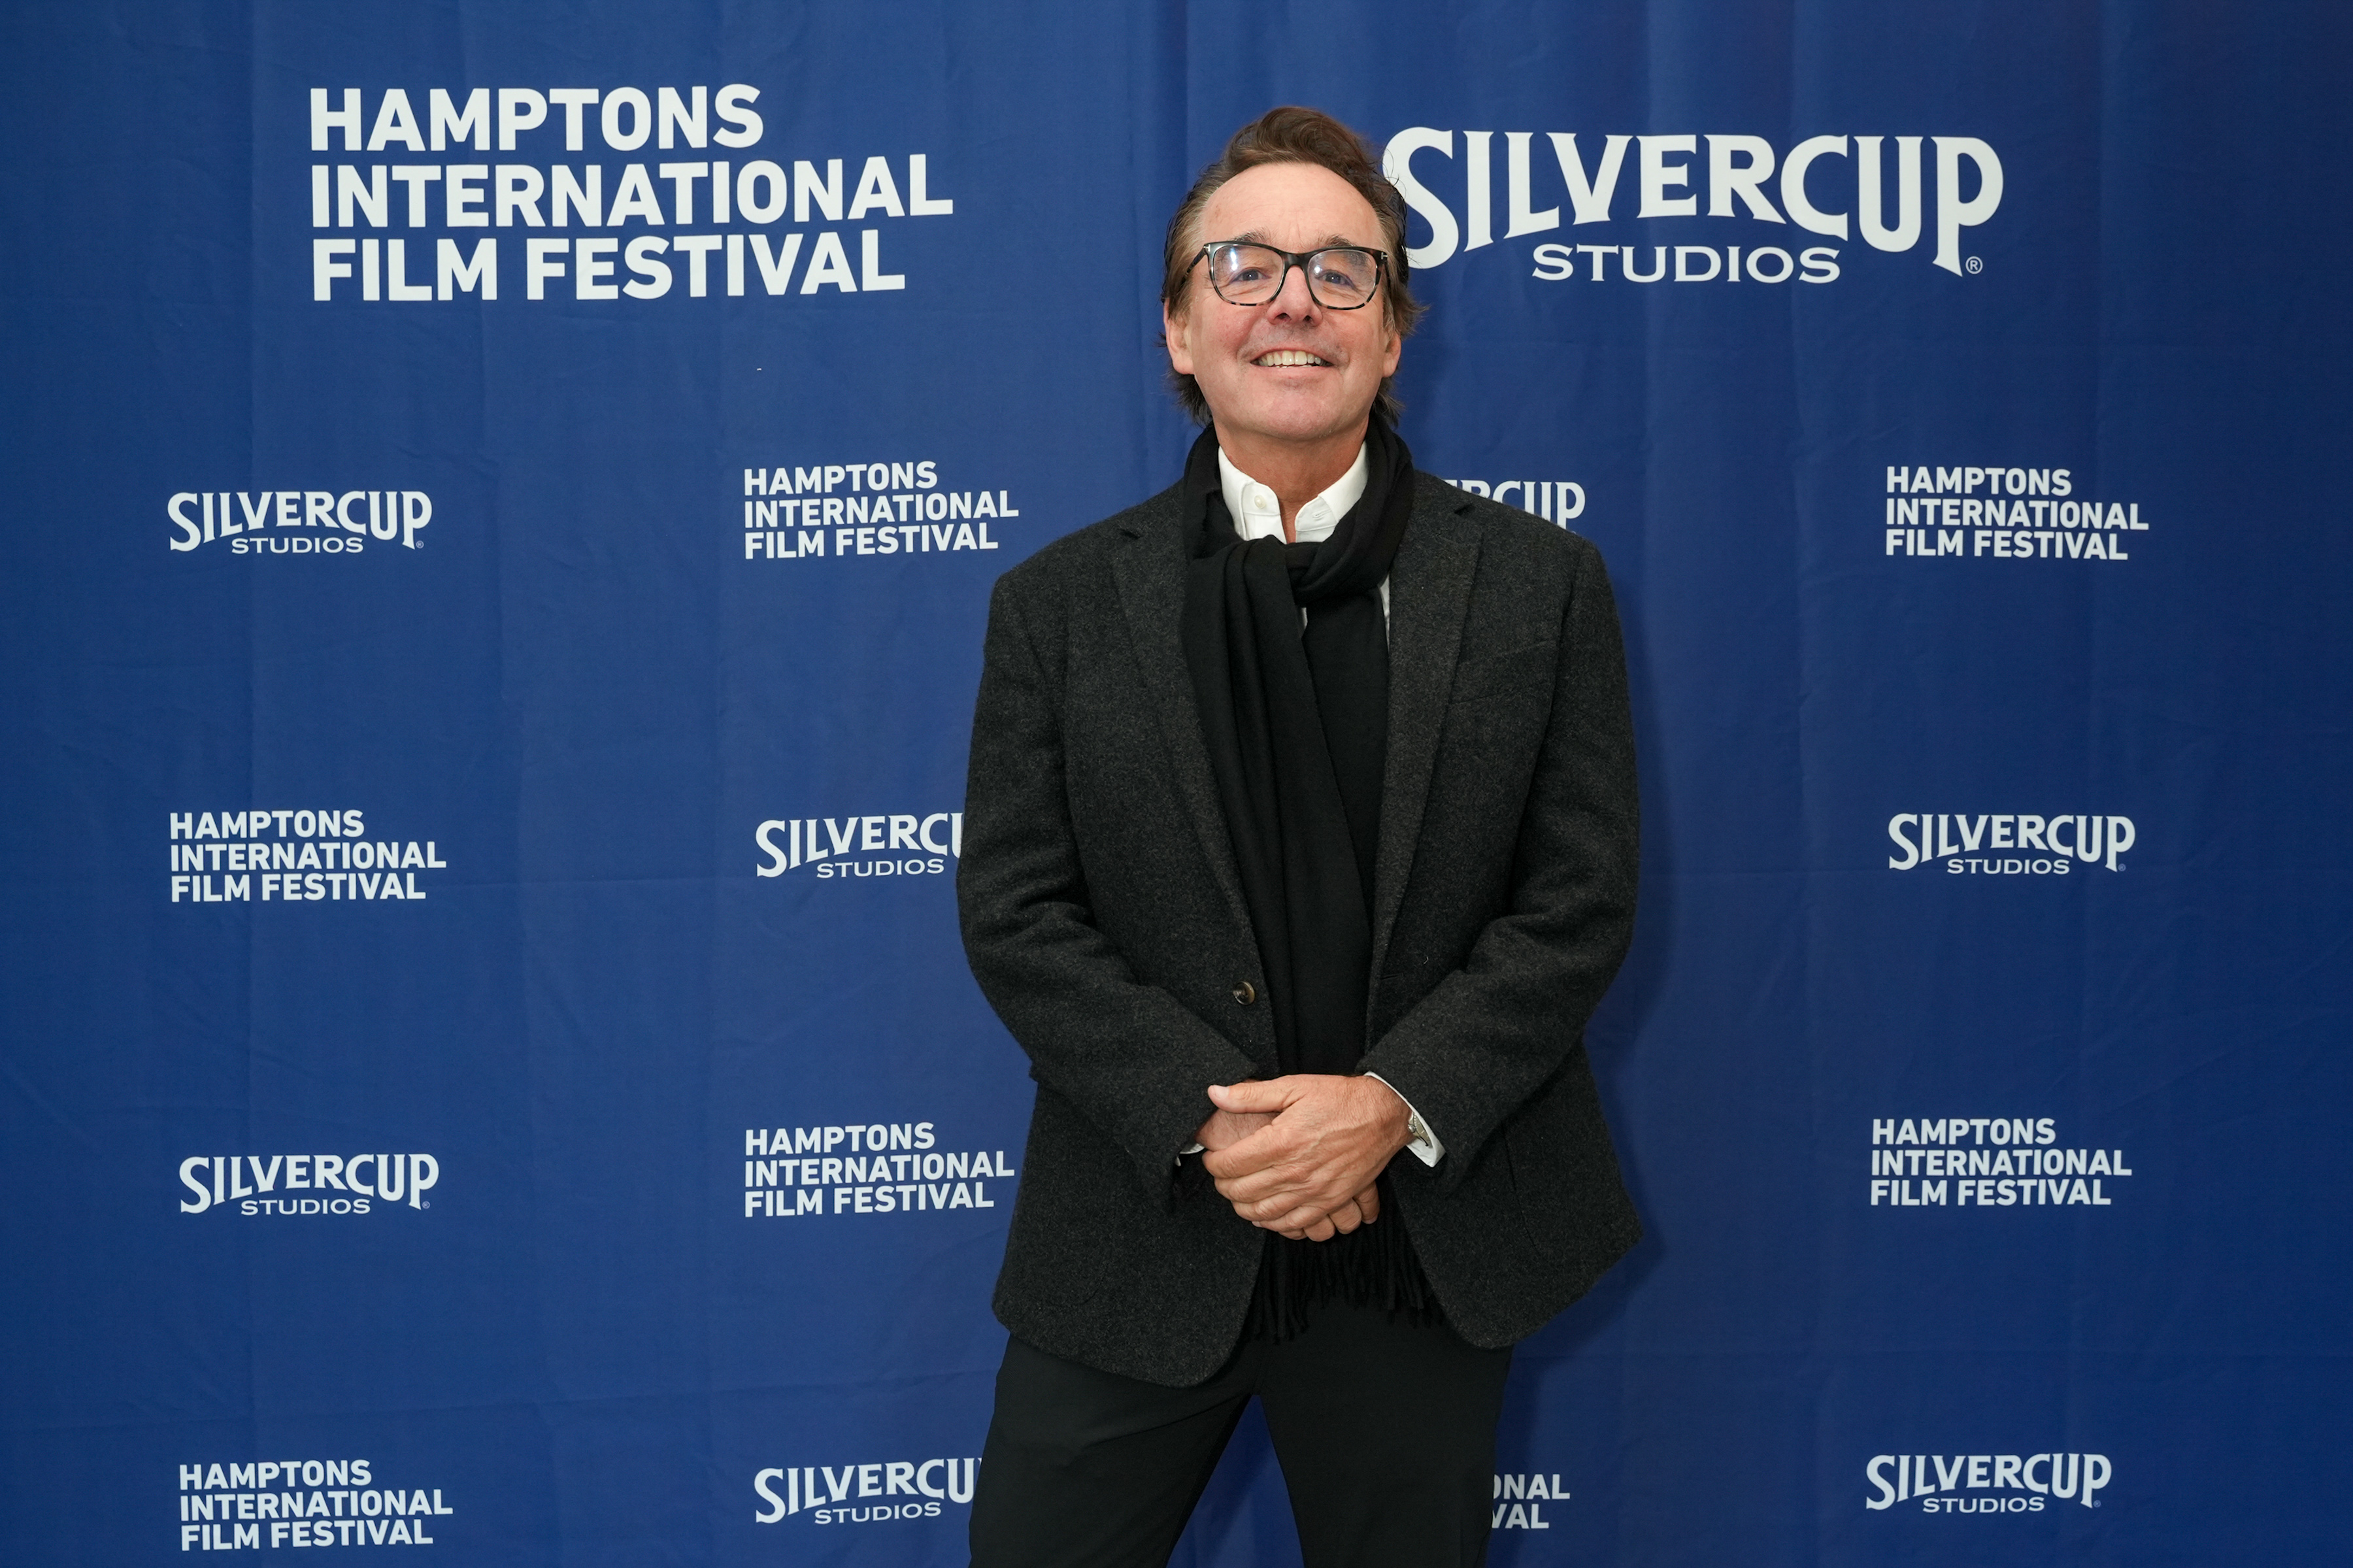 Chris Columbus at the 30th Annual Hamptons International Film Festival in East Hampton, New York on October 9, 2022 | Source: Getty Images